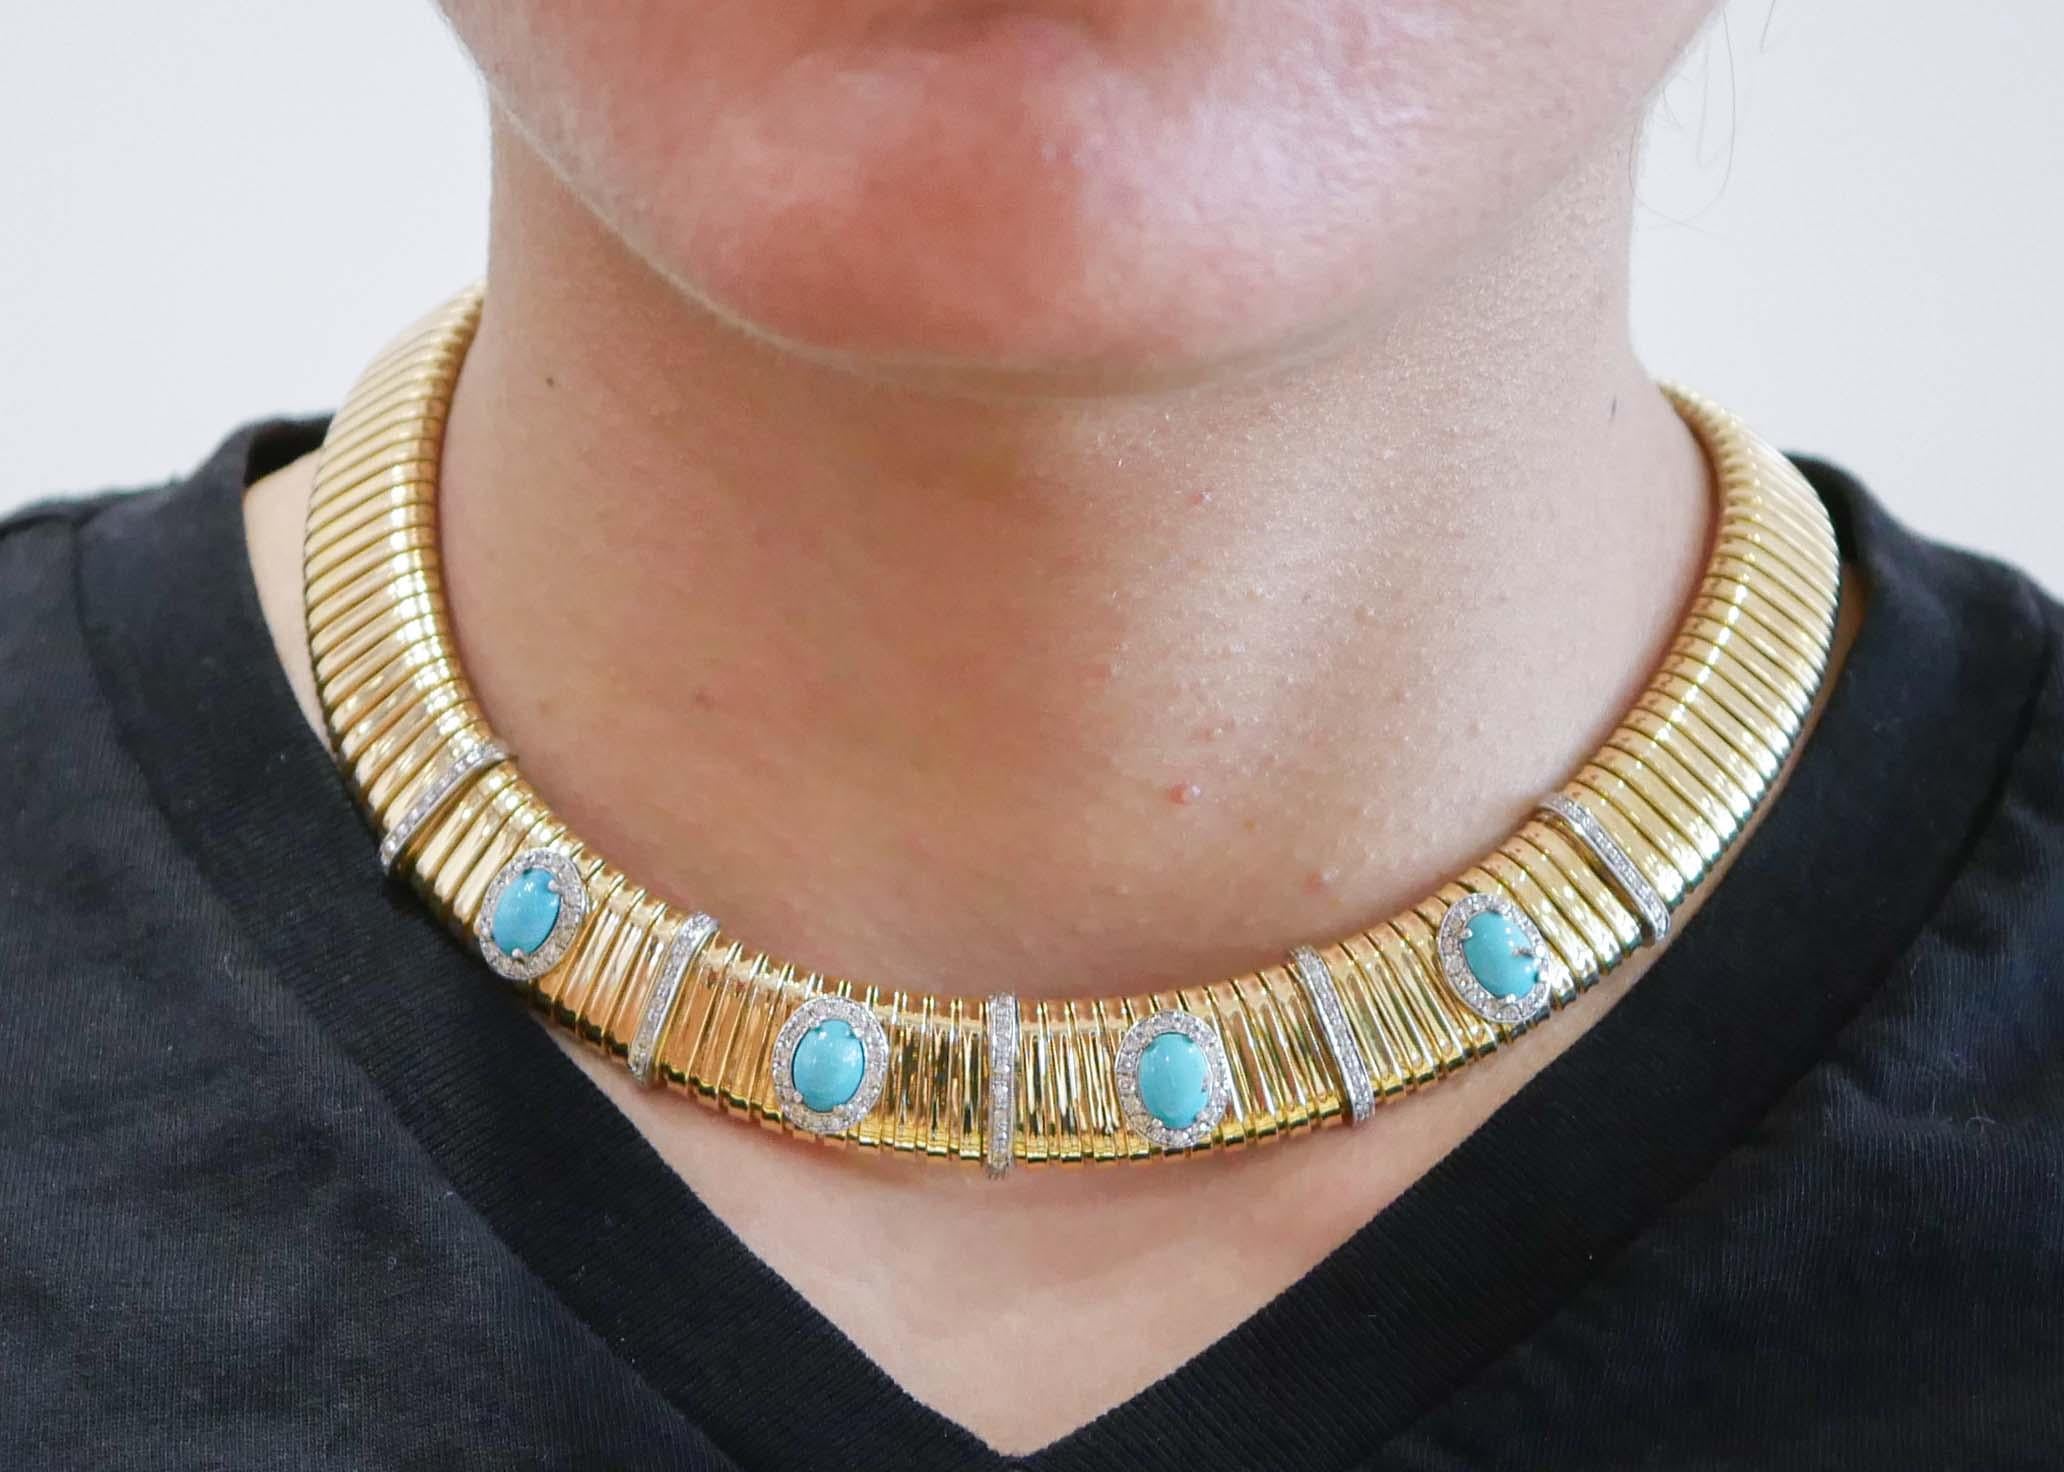 Women's Turquoise, Diamonds, 18 Karat Yellow Gold and White Gold Tubogas Necklace. For Sale